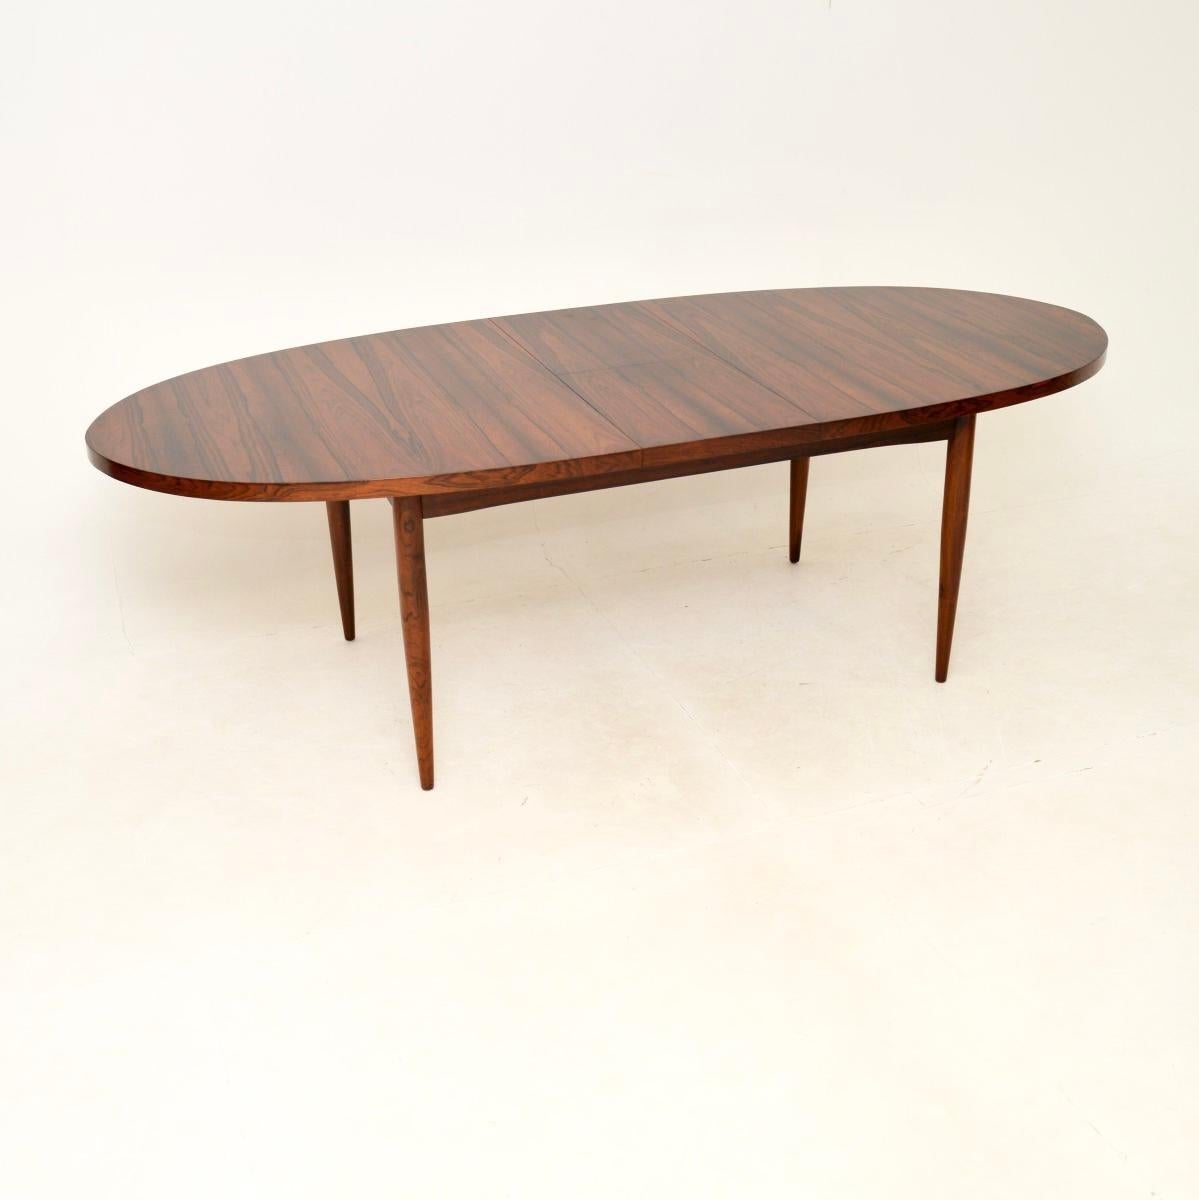 A stunning Danish vintage dining table, dating from the 1960’s.

This is of outstanding quality, with beautiful grain patterns throughout. The oval top slides apart in the middle and an extra leaf can unfold to extend the surface area